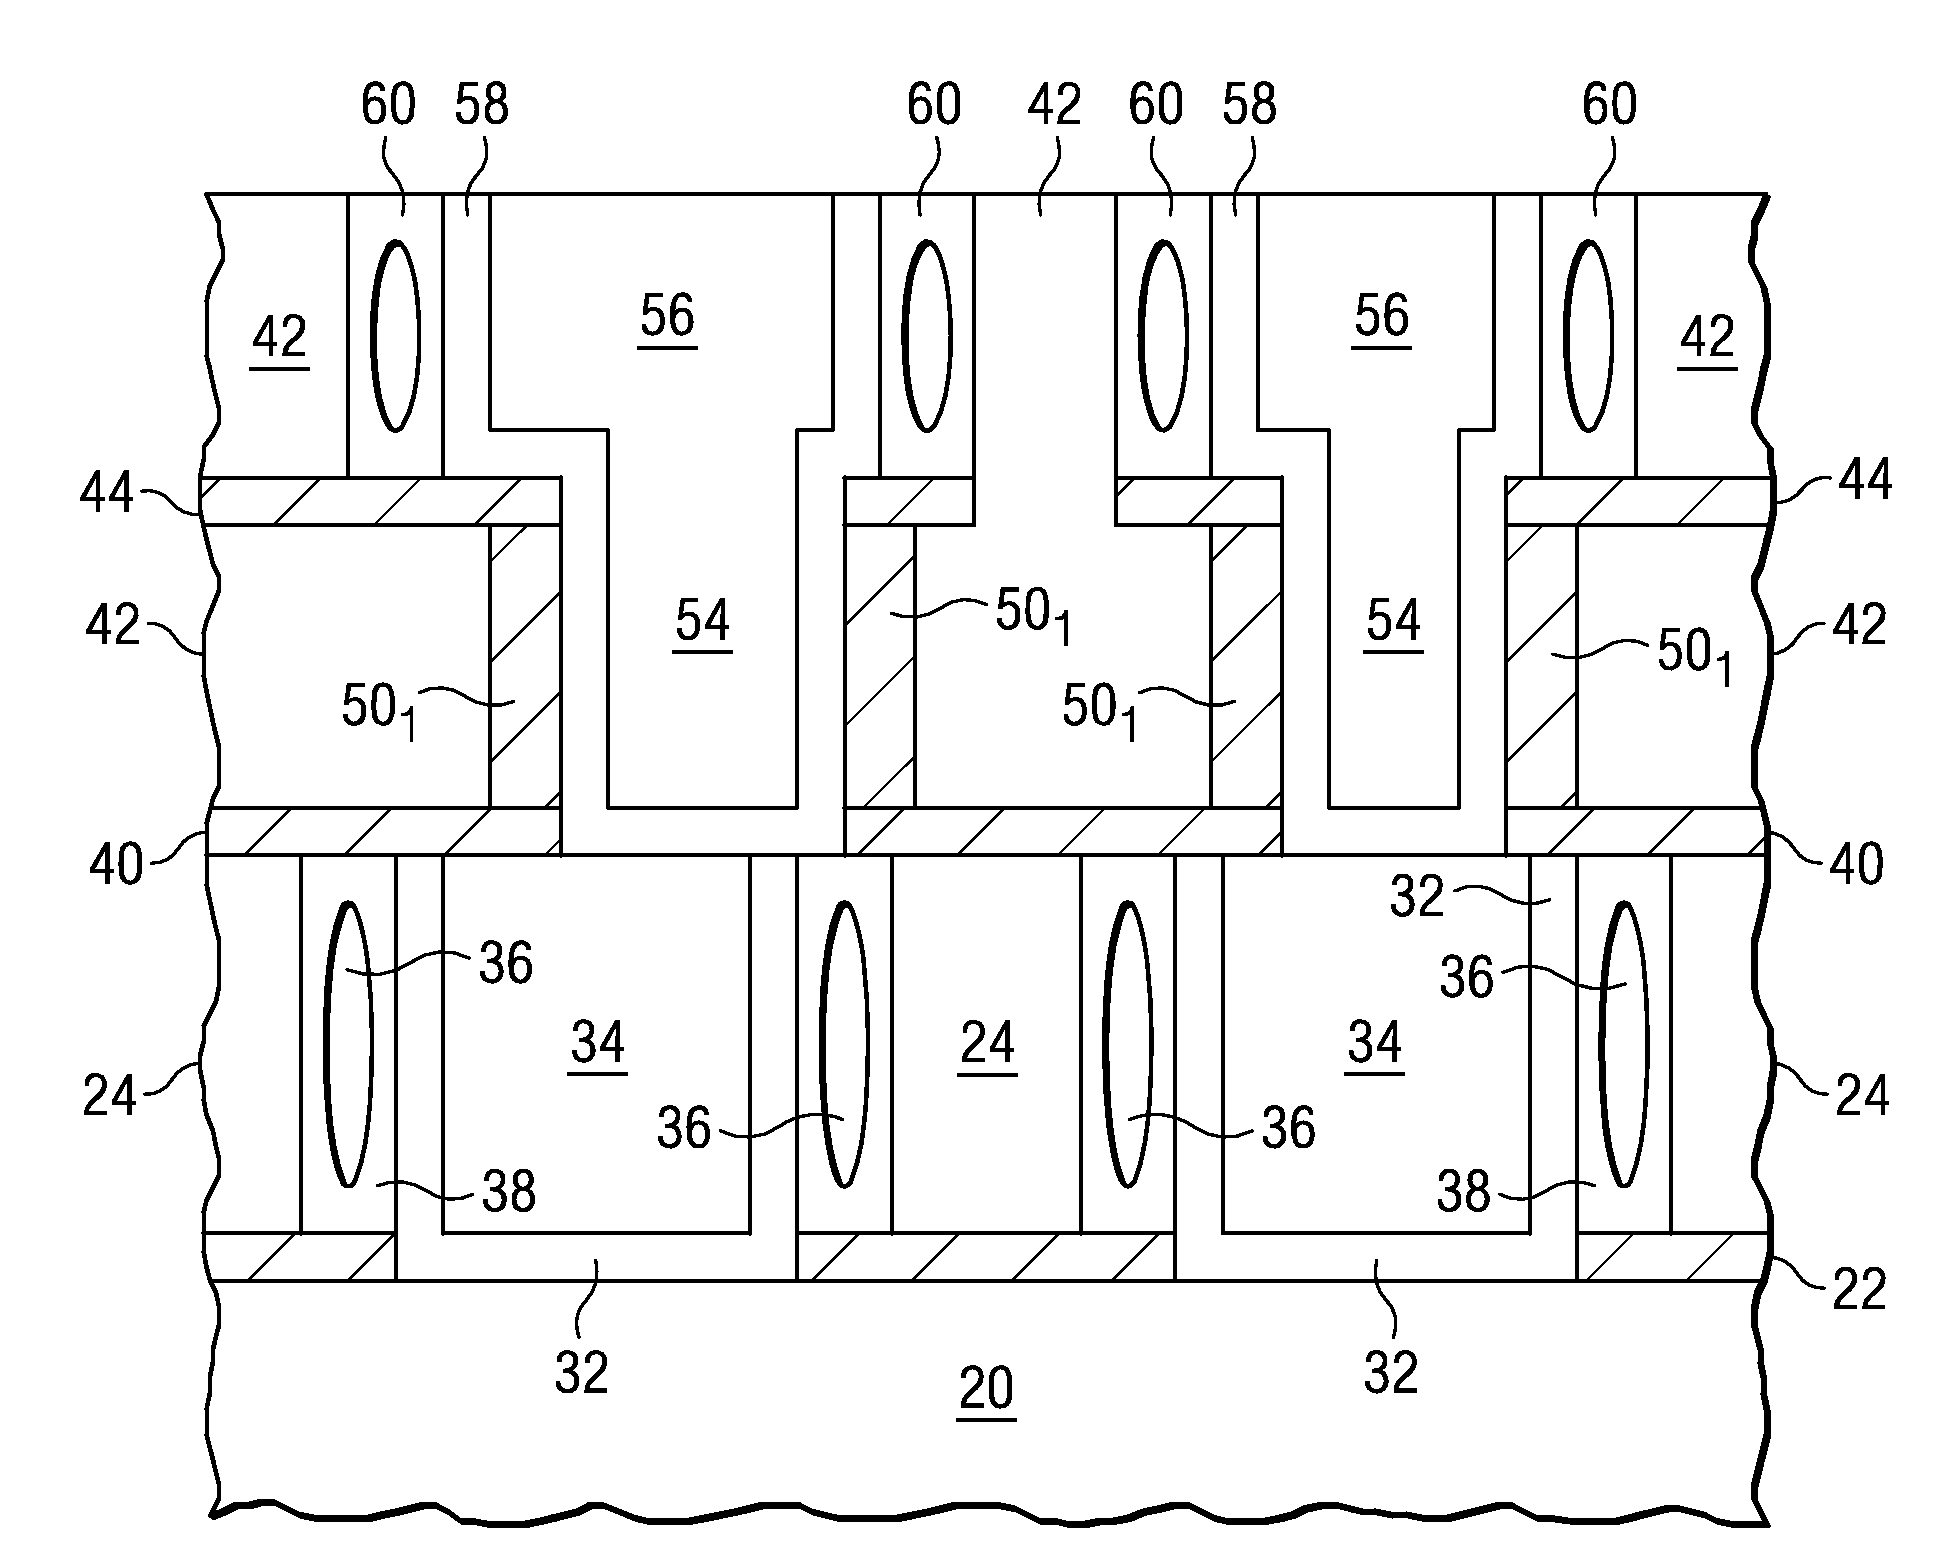 Solving Via-Misalignment Issues in Interconnect Structures Having Air-Gaps